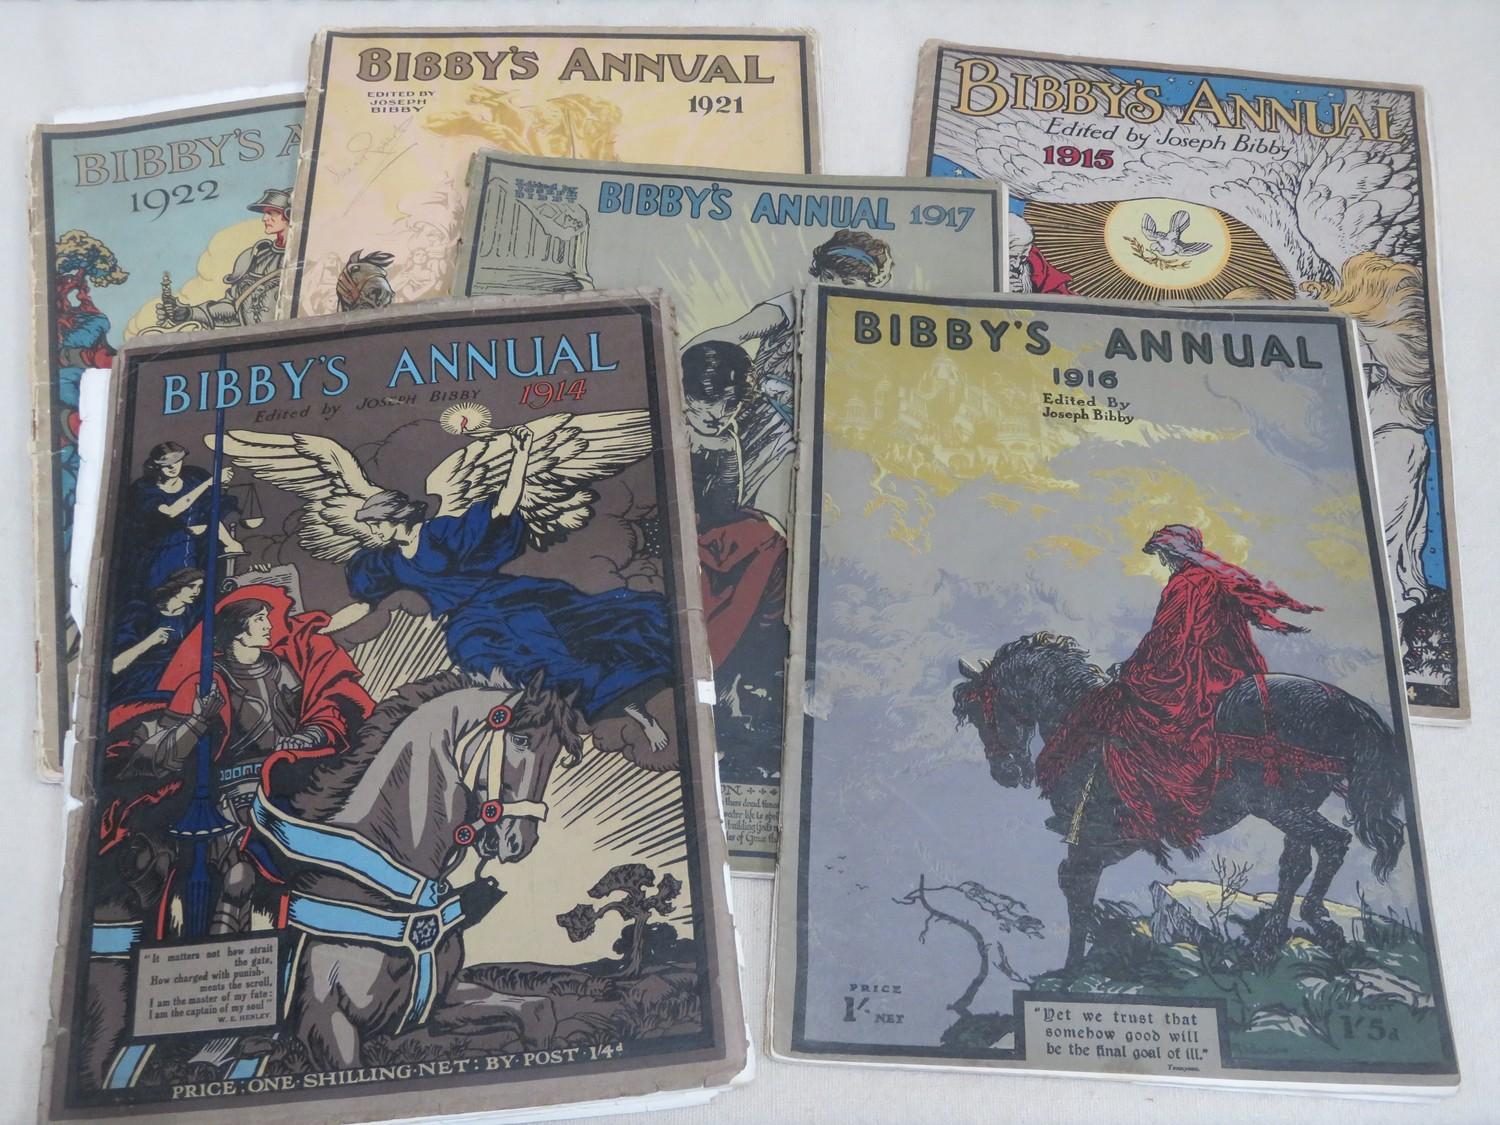 Parcel of six early 20th century Bibby's annuals, dates ranging from 1914-1922